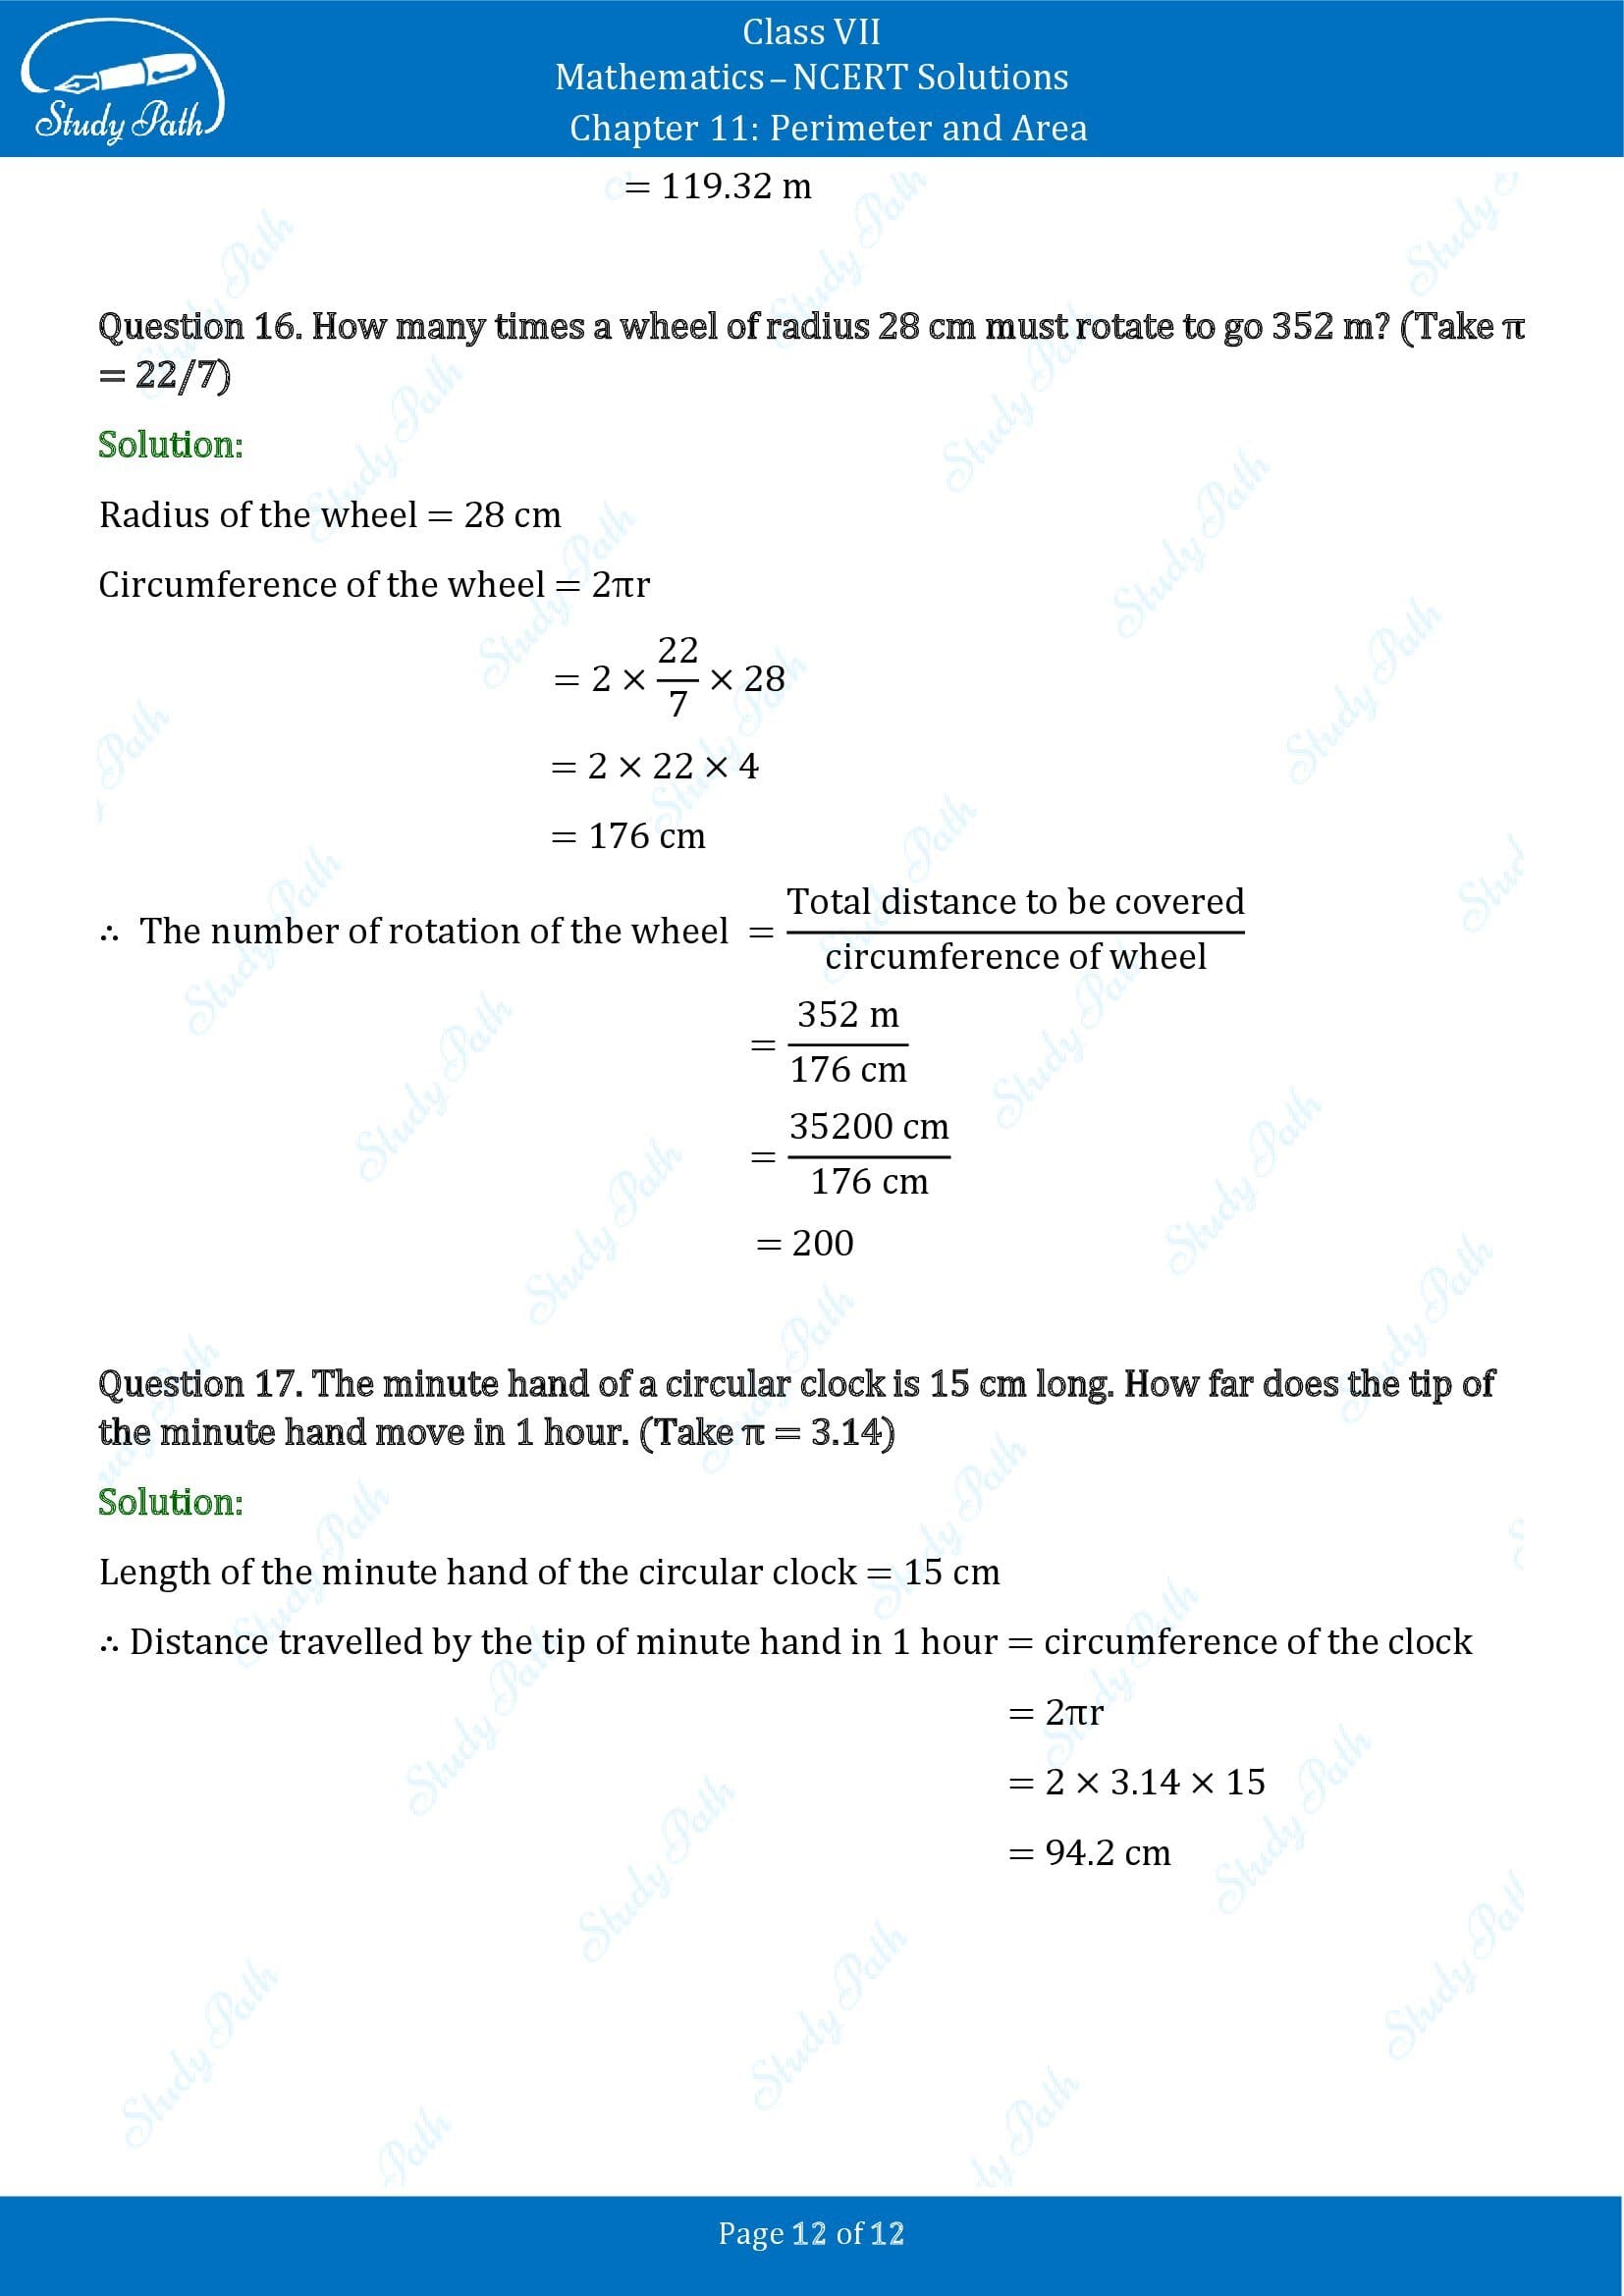 NCERT Solutions for Class 7 Maths Chapter 11 Perimeter and Area Exercise 11.3 00012